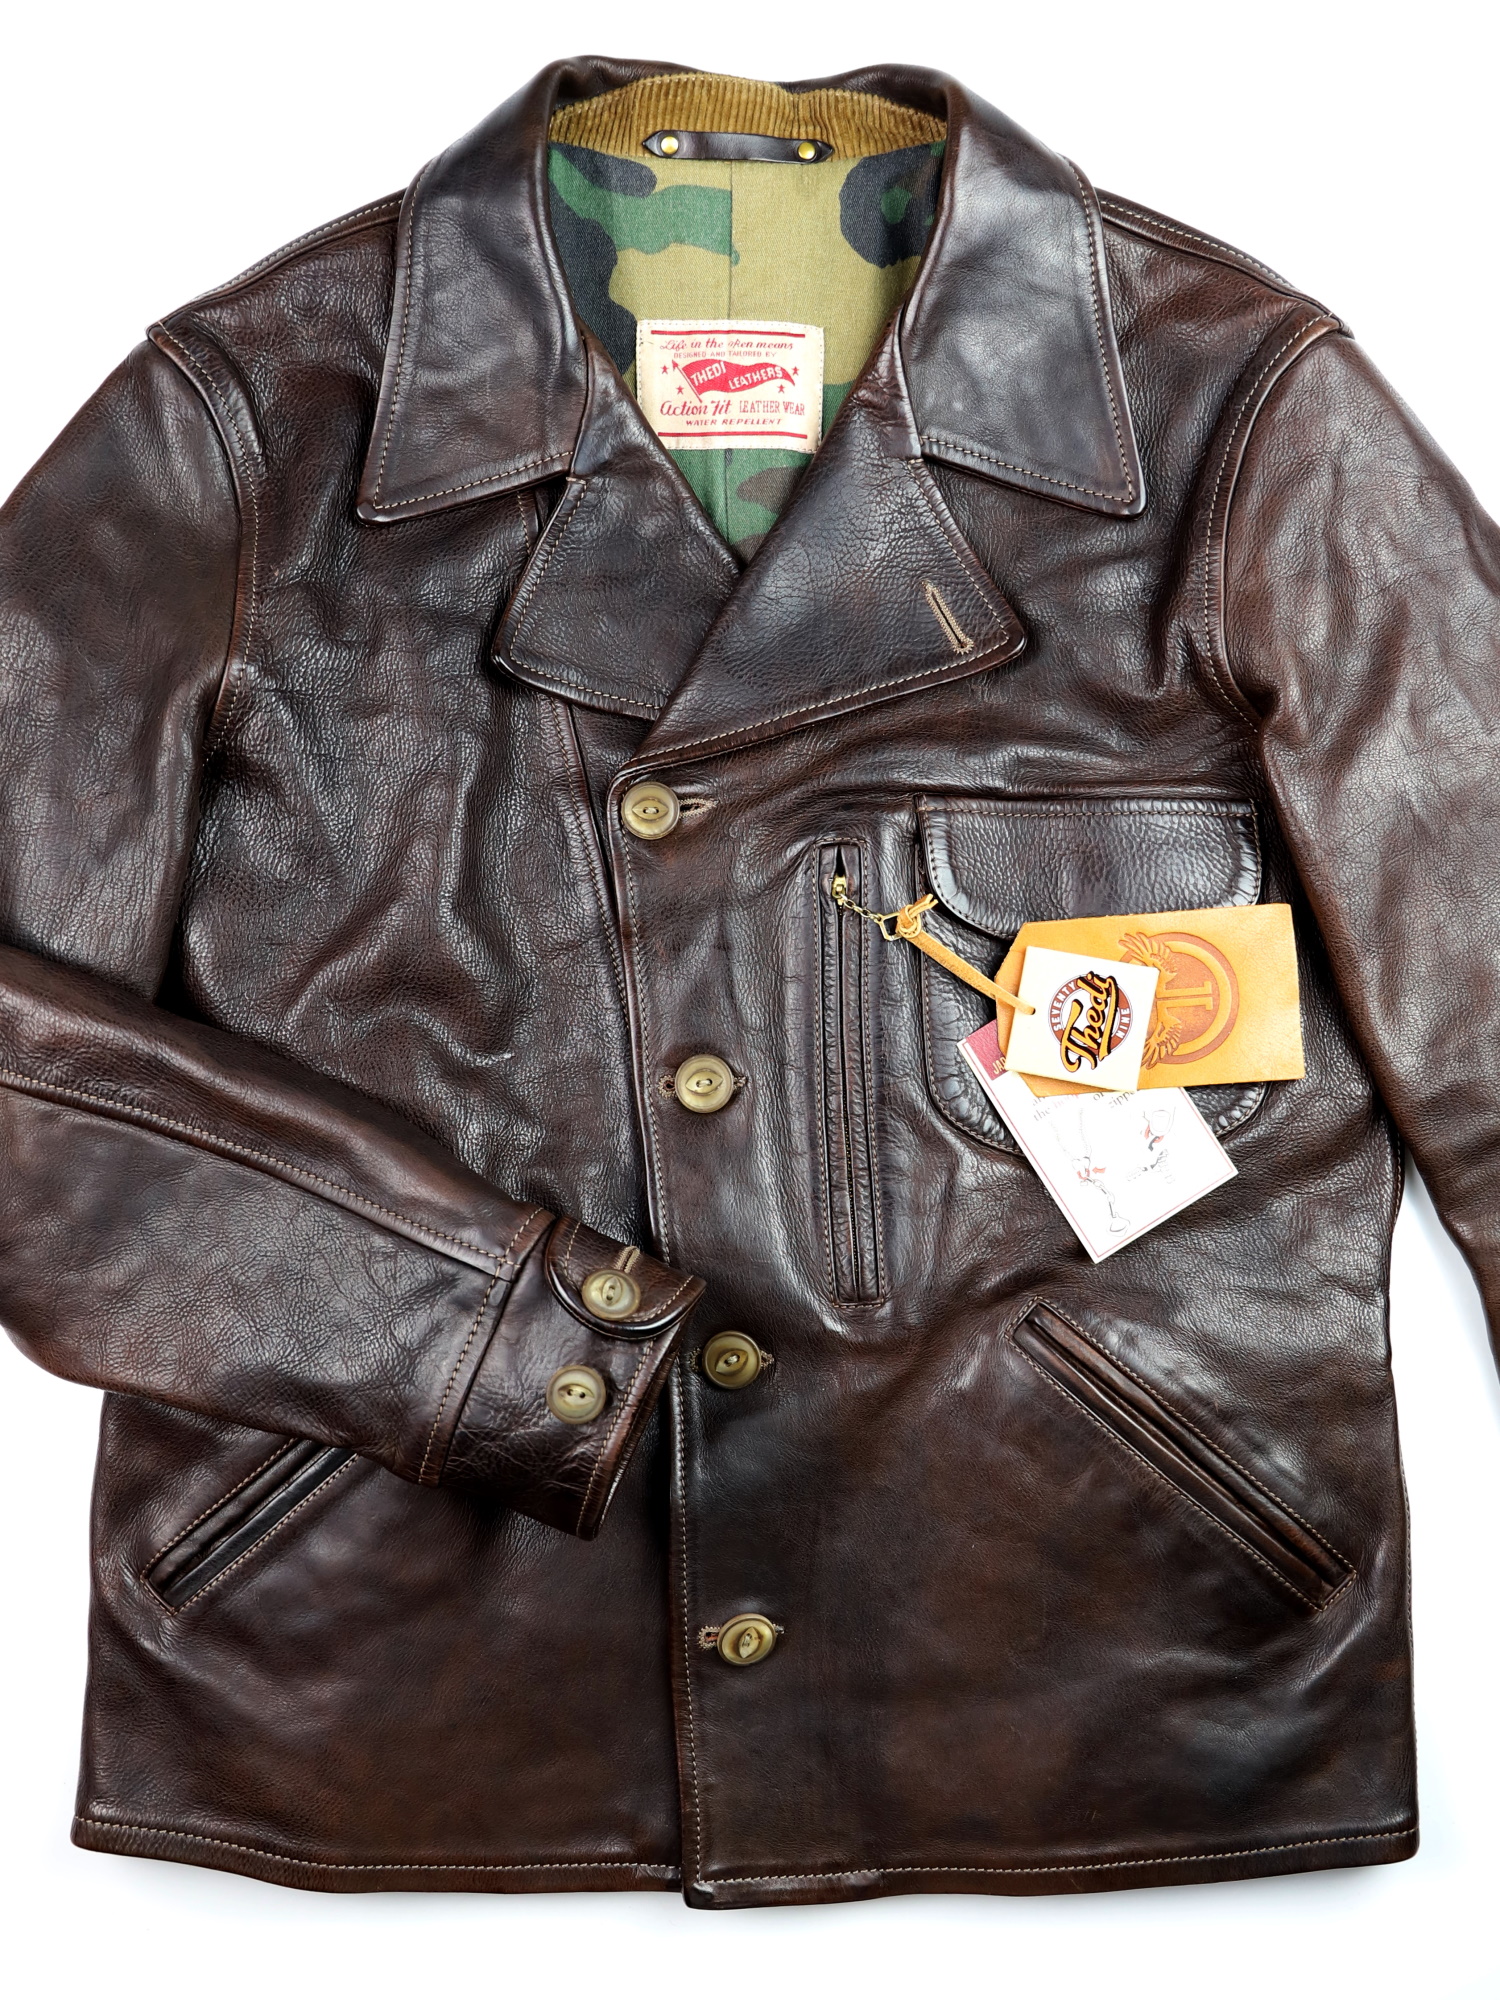 Thedi Hektor Brown Canneto Cowhide L1 front.jpg